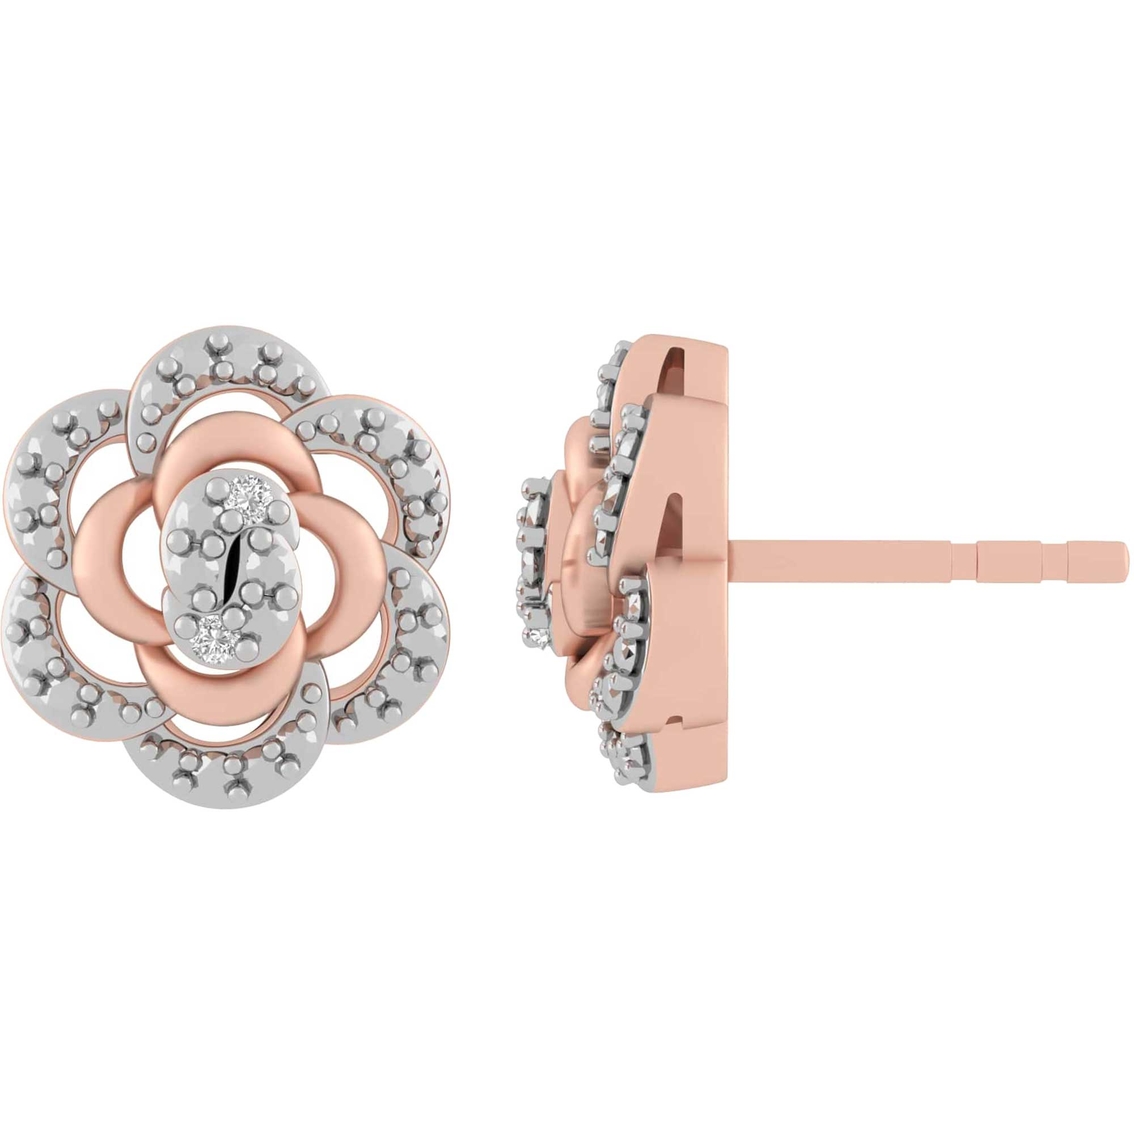 Sterling Silver 10K Rose Goldtone Diamond Accent Earrings and Pendant Flower Set - Image 5 of 6